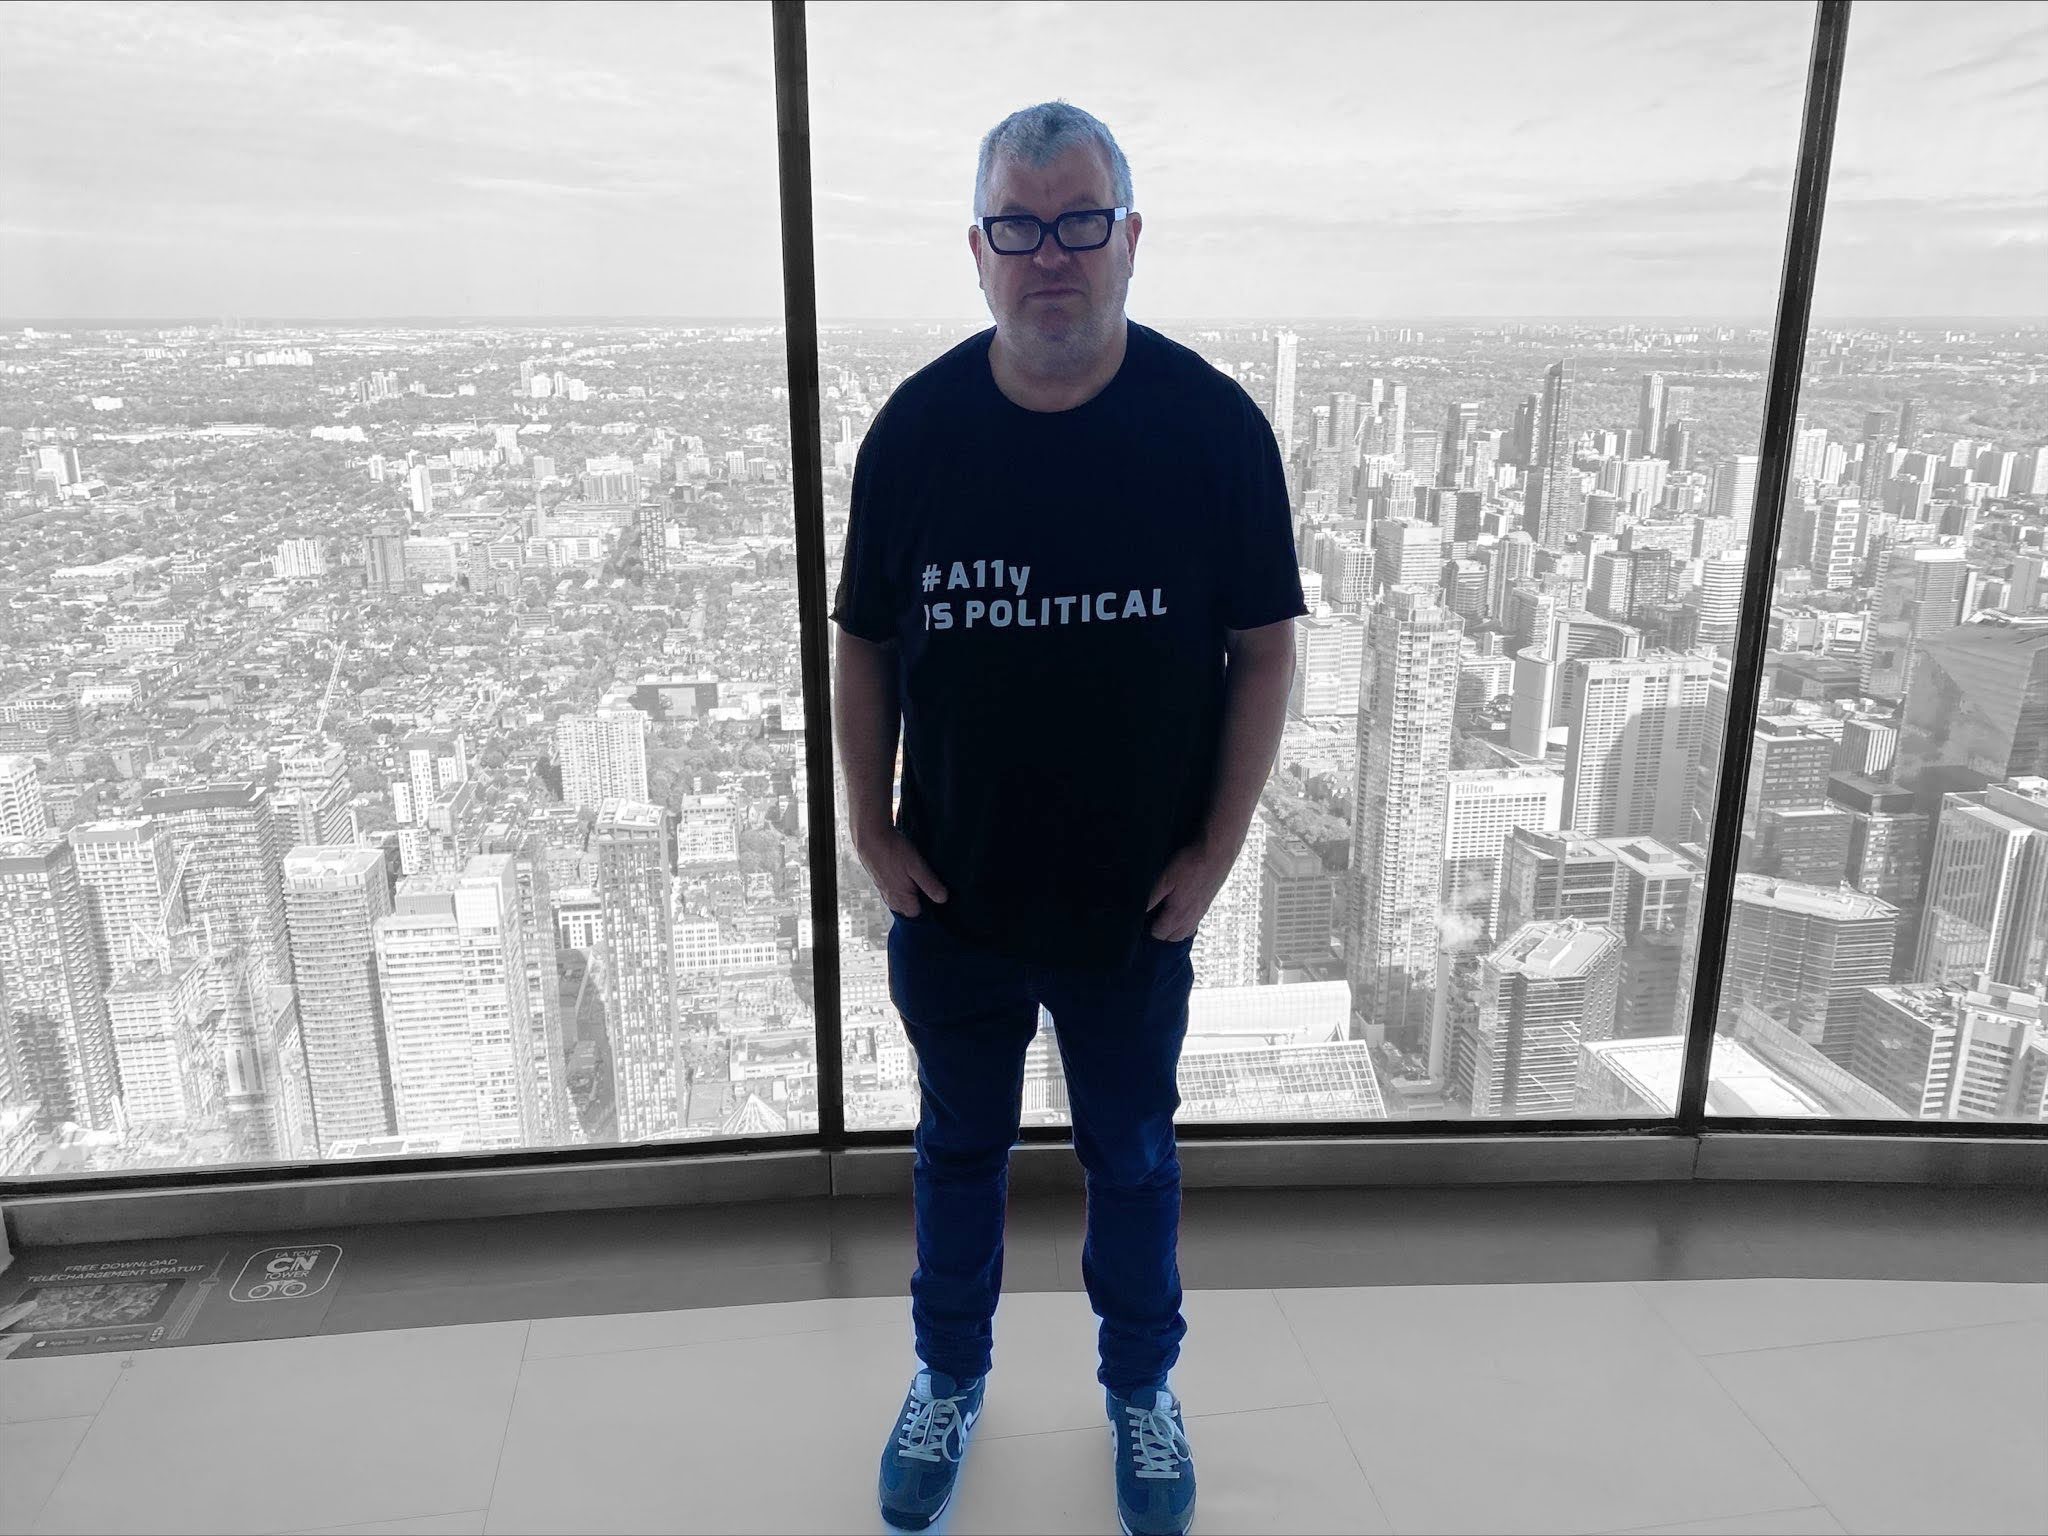 Steve wearing an #a11y is political t-shirt. a view of Toronto from the top of the CN tower in the background.